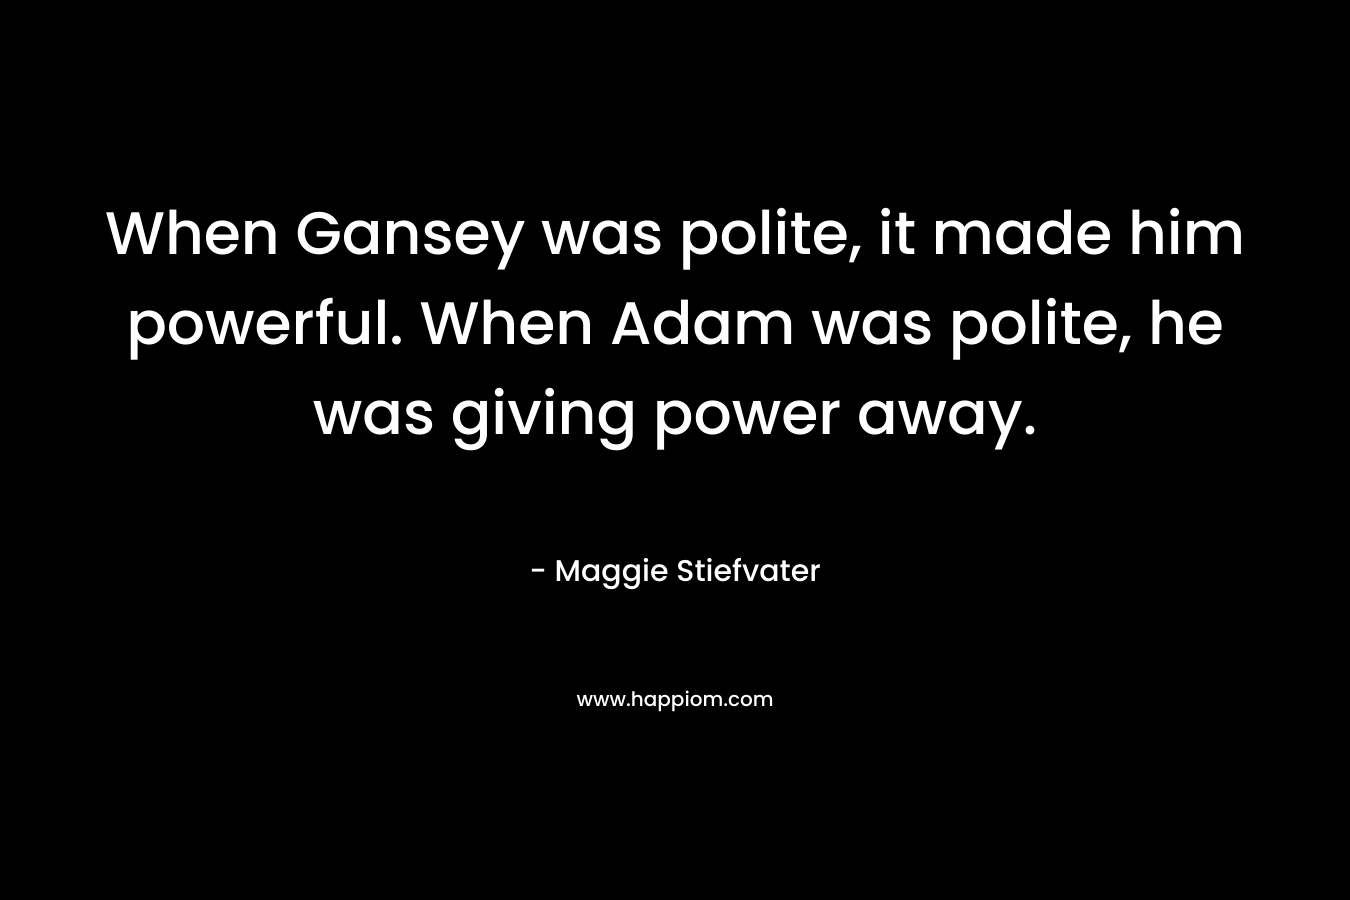 When Gansey was polite, it made him powerful. When Adam was polite, he was giving power away.